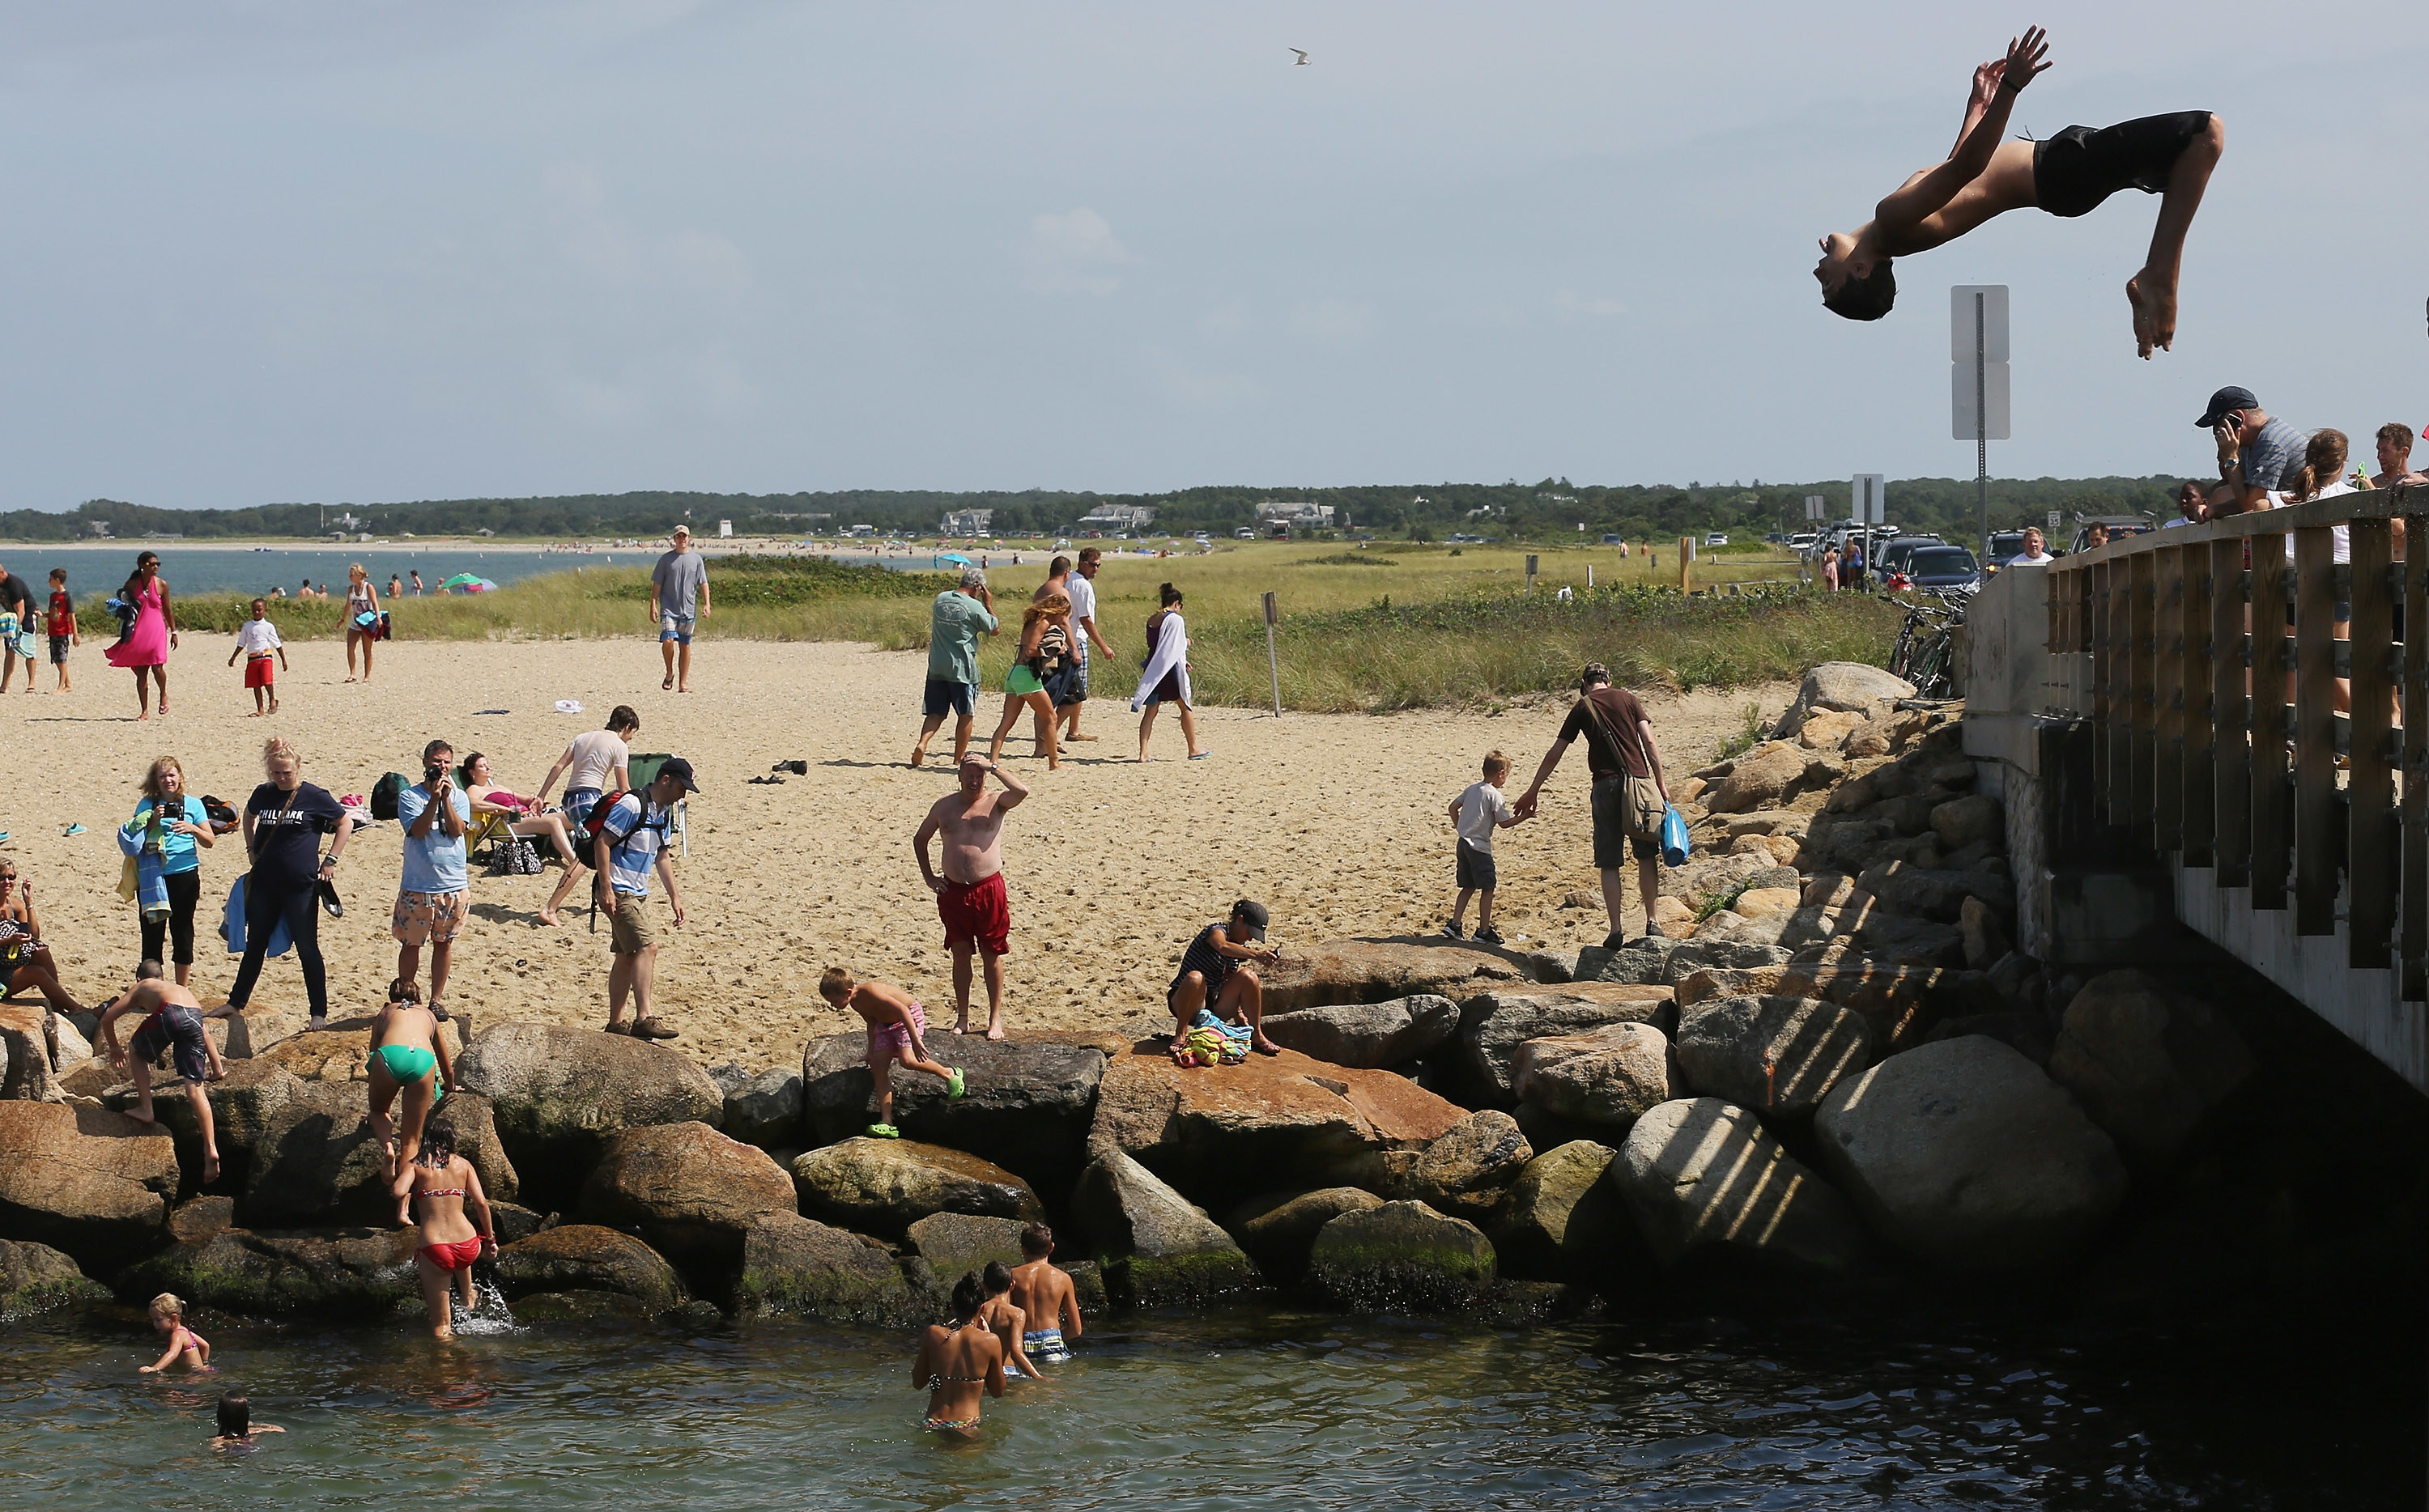 A boy jumps off &#x27;Jaws Bridge&#x27; during JawsFest: The Tribute in 2012, a festival celebrating the film &quot;Jaws,&quot; on the island of Martha&#x27;s Vineyard in Edgartown, Massachusetts